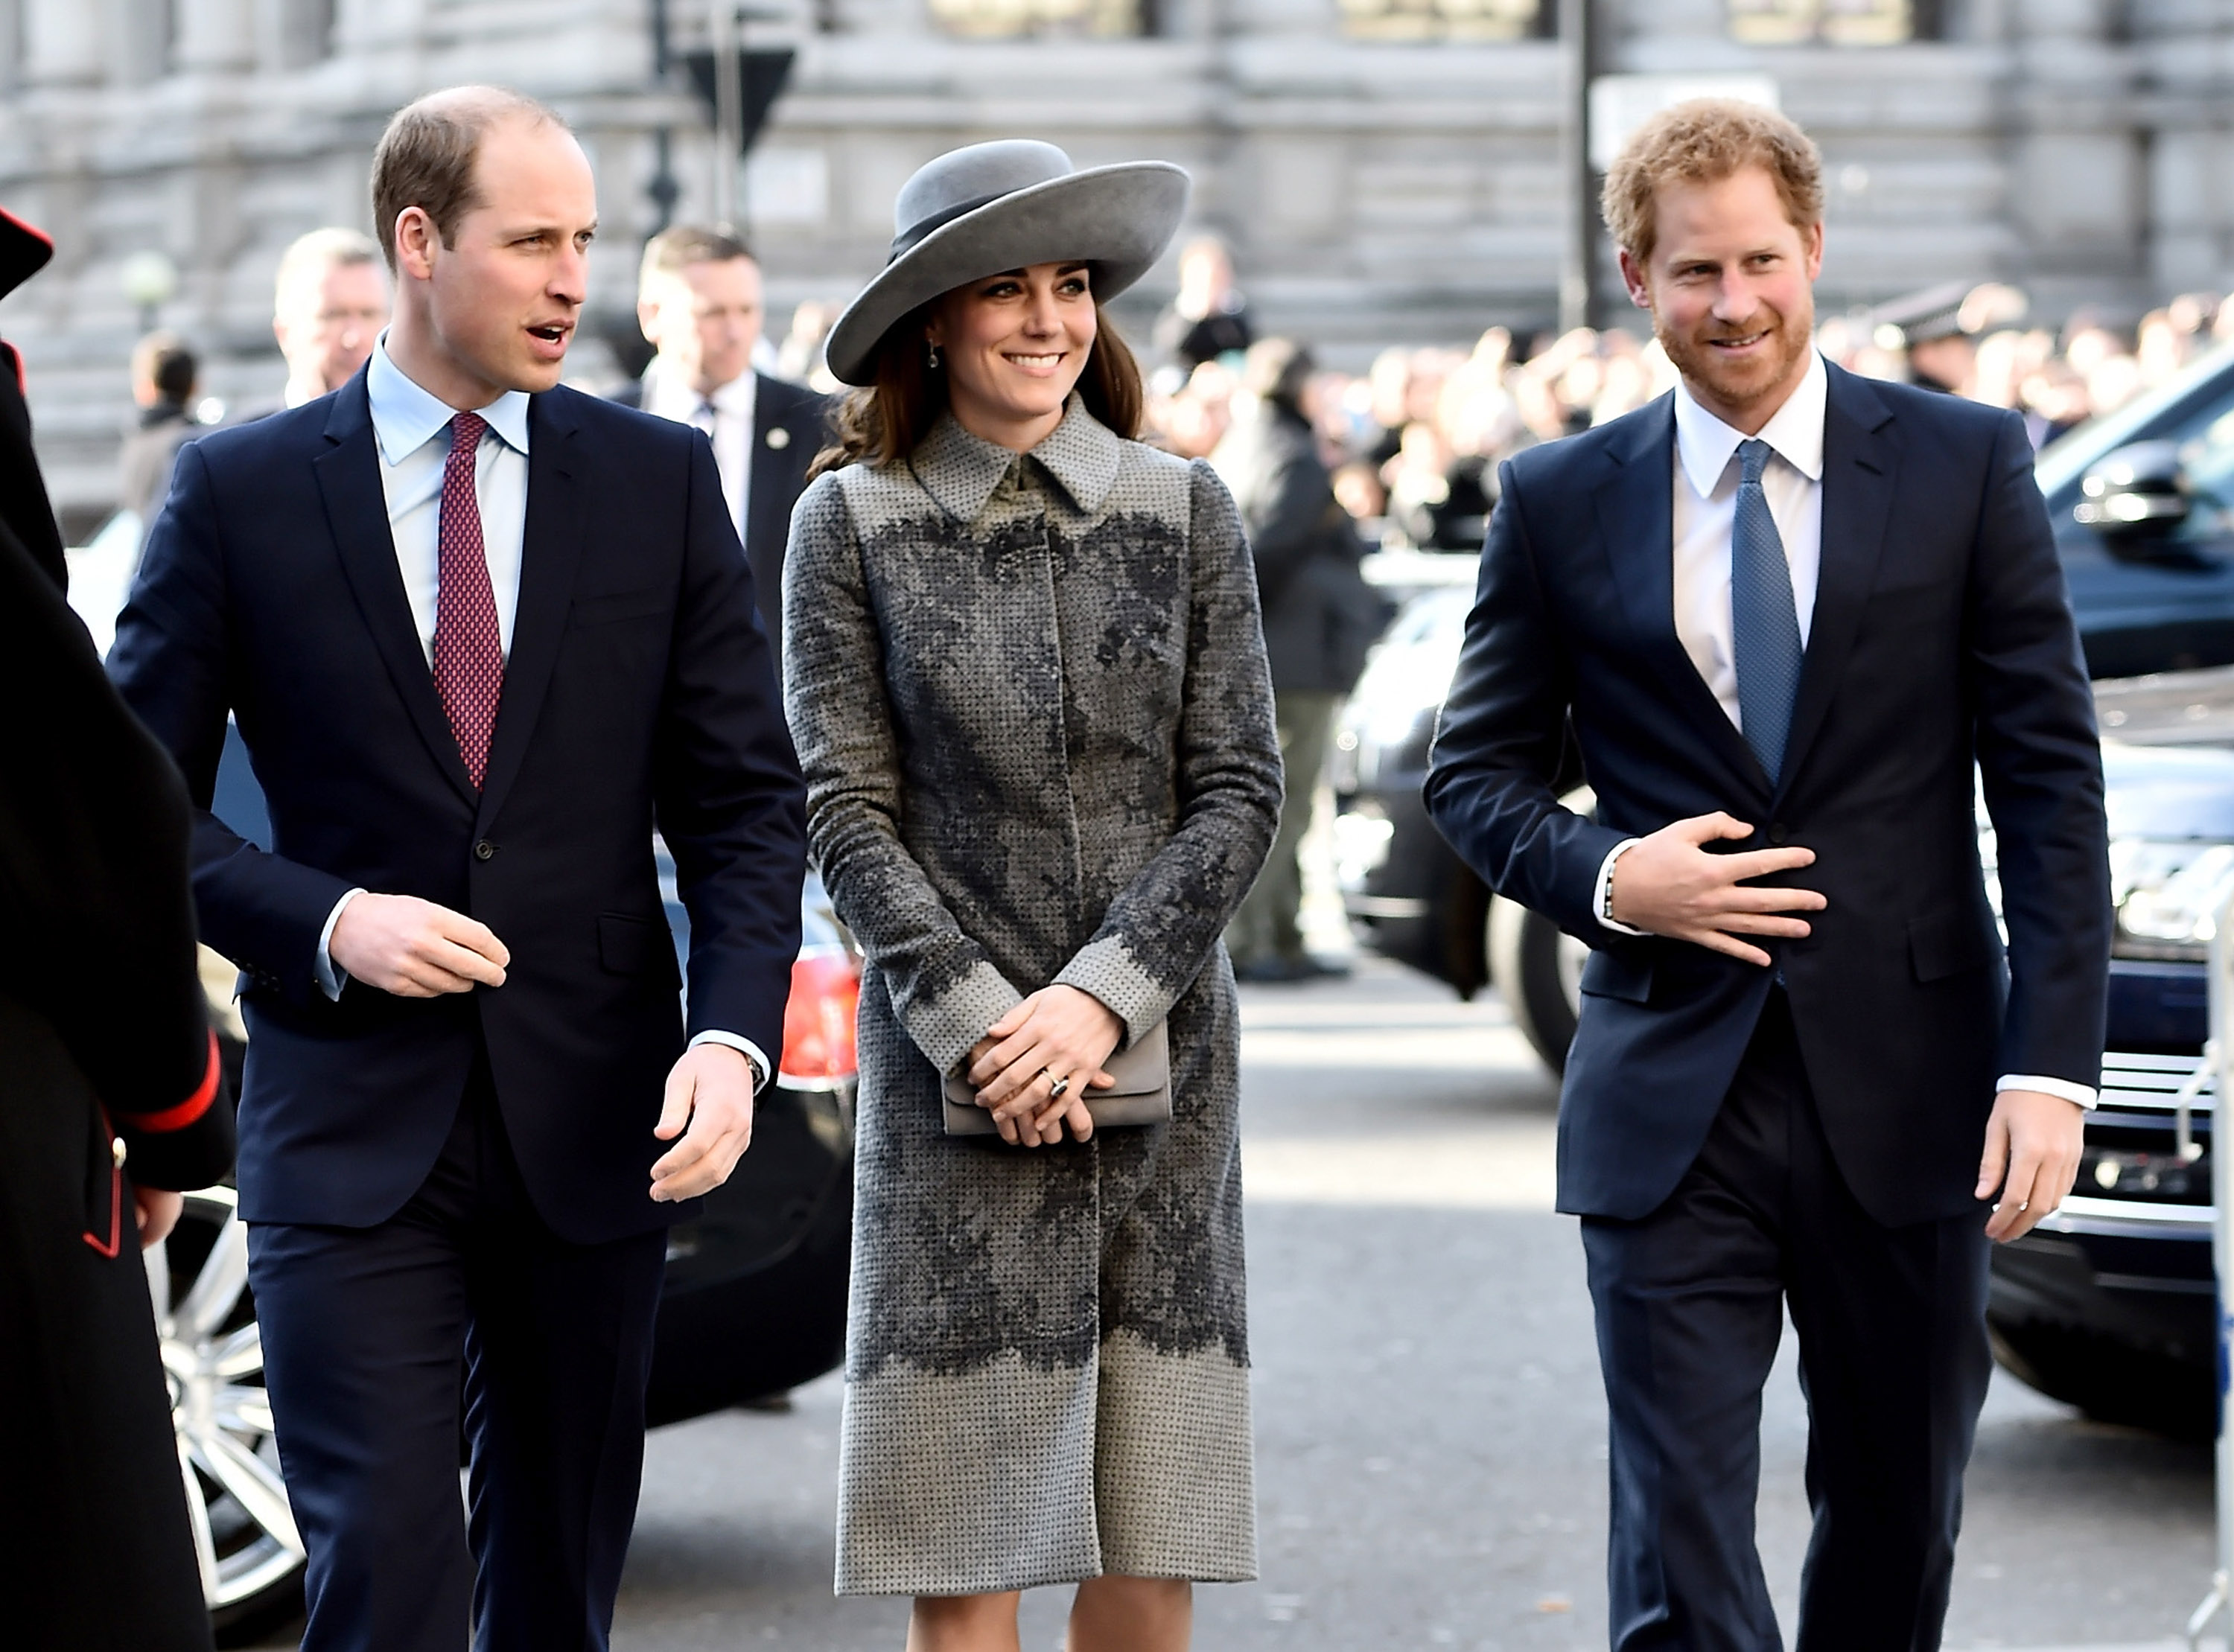 Prince William, Duke of Cambridge, Catherine, Duchess of Cambridge and Prince Harry attend the Commonwealth Observance Day Service on March 14, 2016 in London, United Kingdom. (Gareth Cattermole—Getty Images)